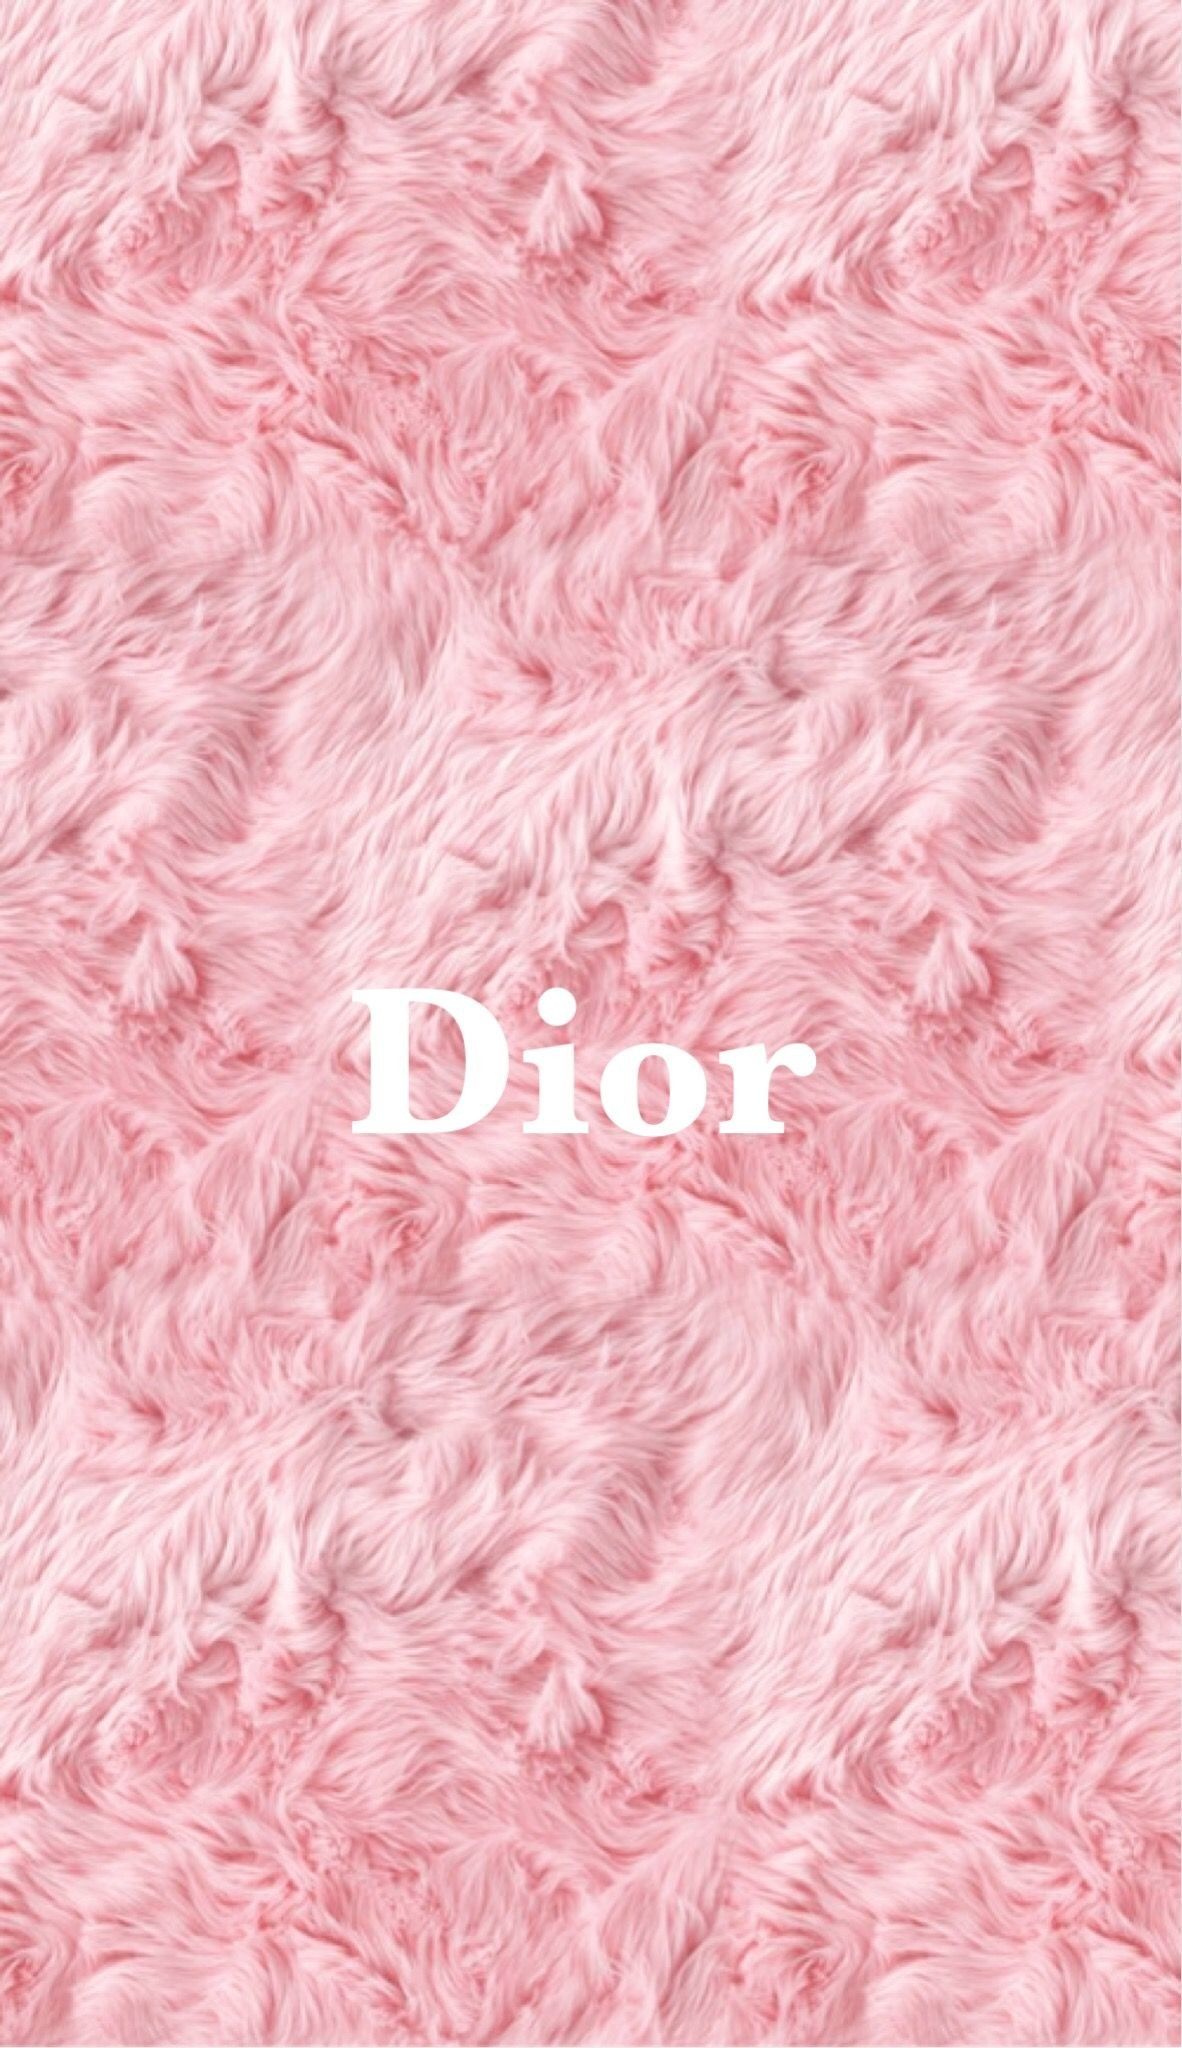 Dior iPhone Wallpaper Free Dior iPhone Background